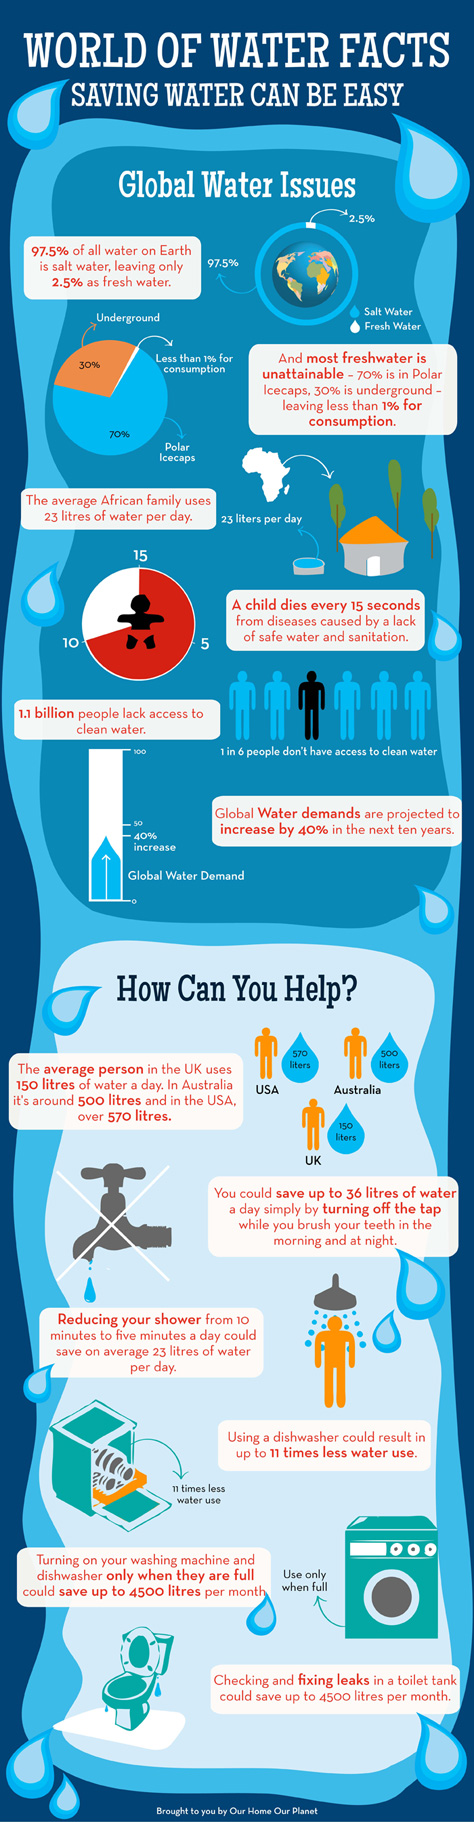 infographic_world_of_water_facts_big